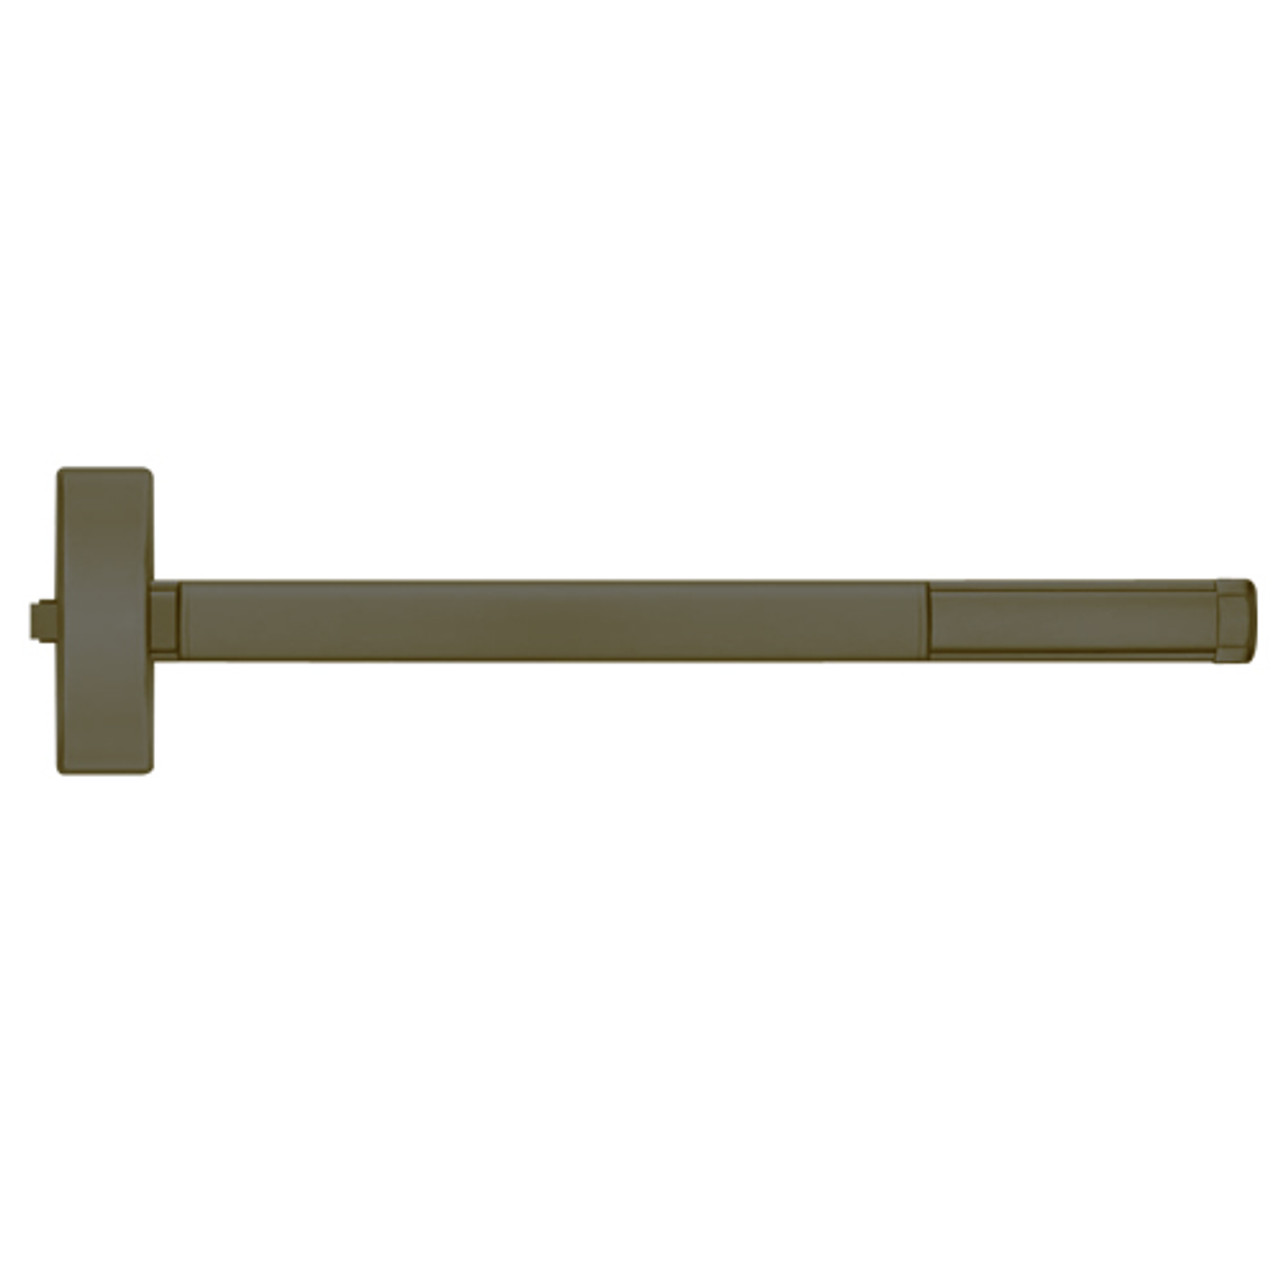 DEFL2105-613-36 PHI 2100 Series Fire Rated Apex Rim Exit Device with Delayed Egress Prepped for Key Controls Thumb Piece in Oil Rubbed Bronze Finish